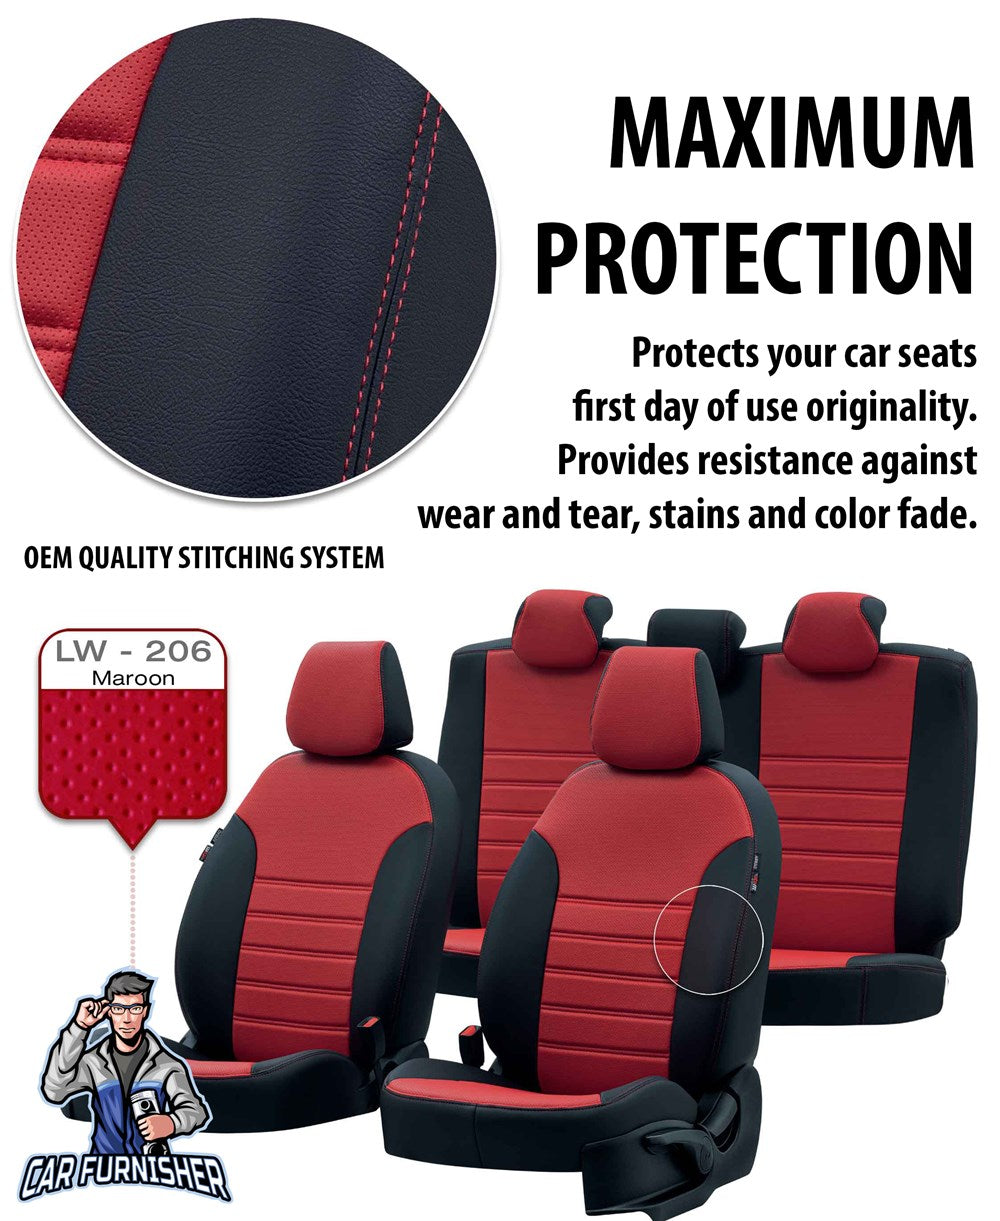 Geely Emgrand Seat Covers Istanbul Leather Design Smoked Leather